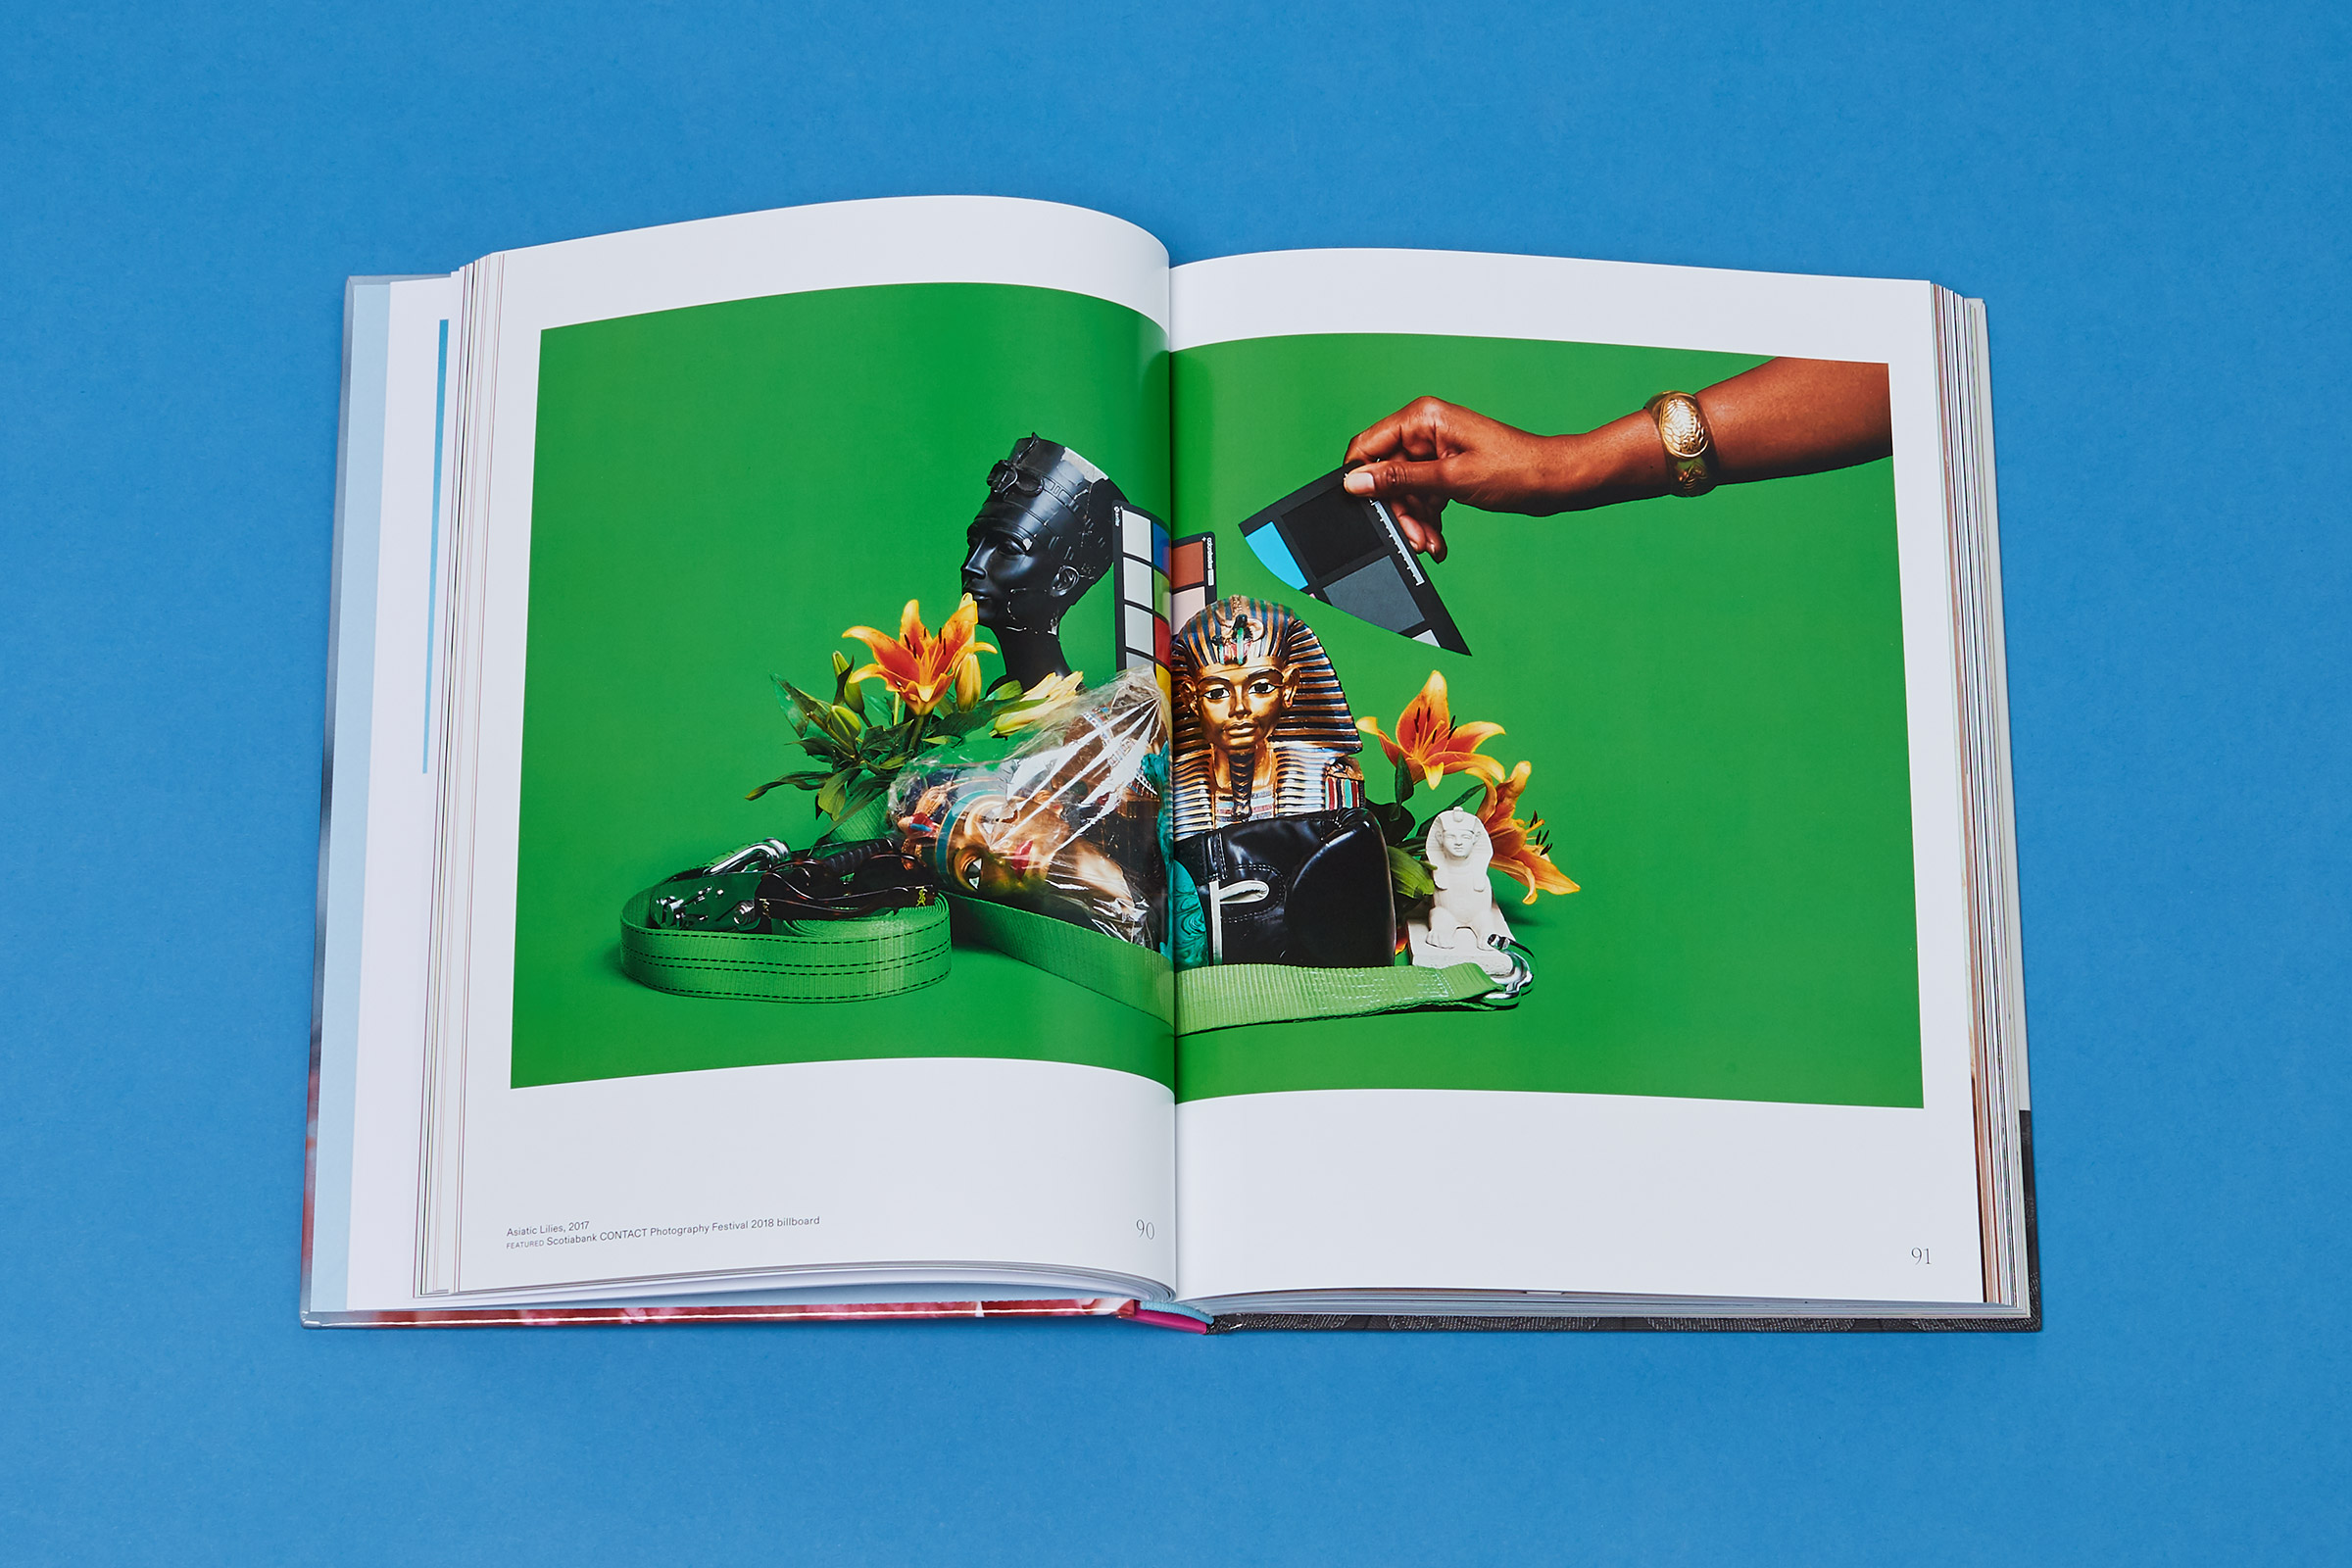 Photograph by Awol Erizku from The New Black Vanguard: Photography between Art and Fashion by Antwaun Sargent (Jessica Pettway for TIME)